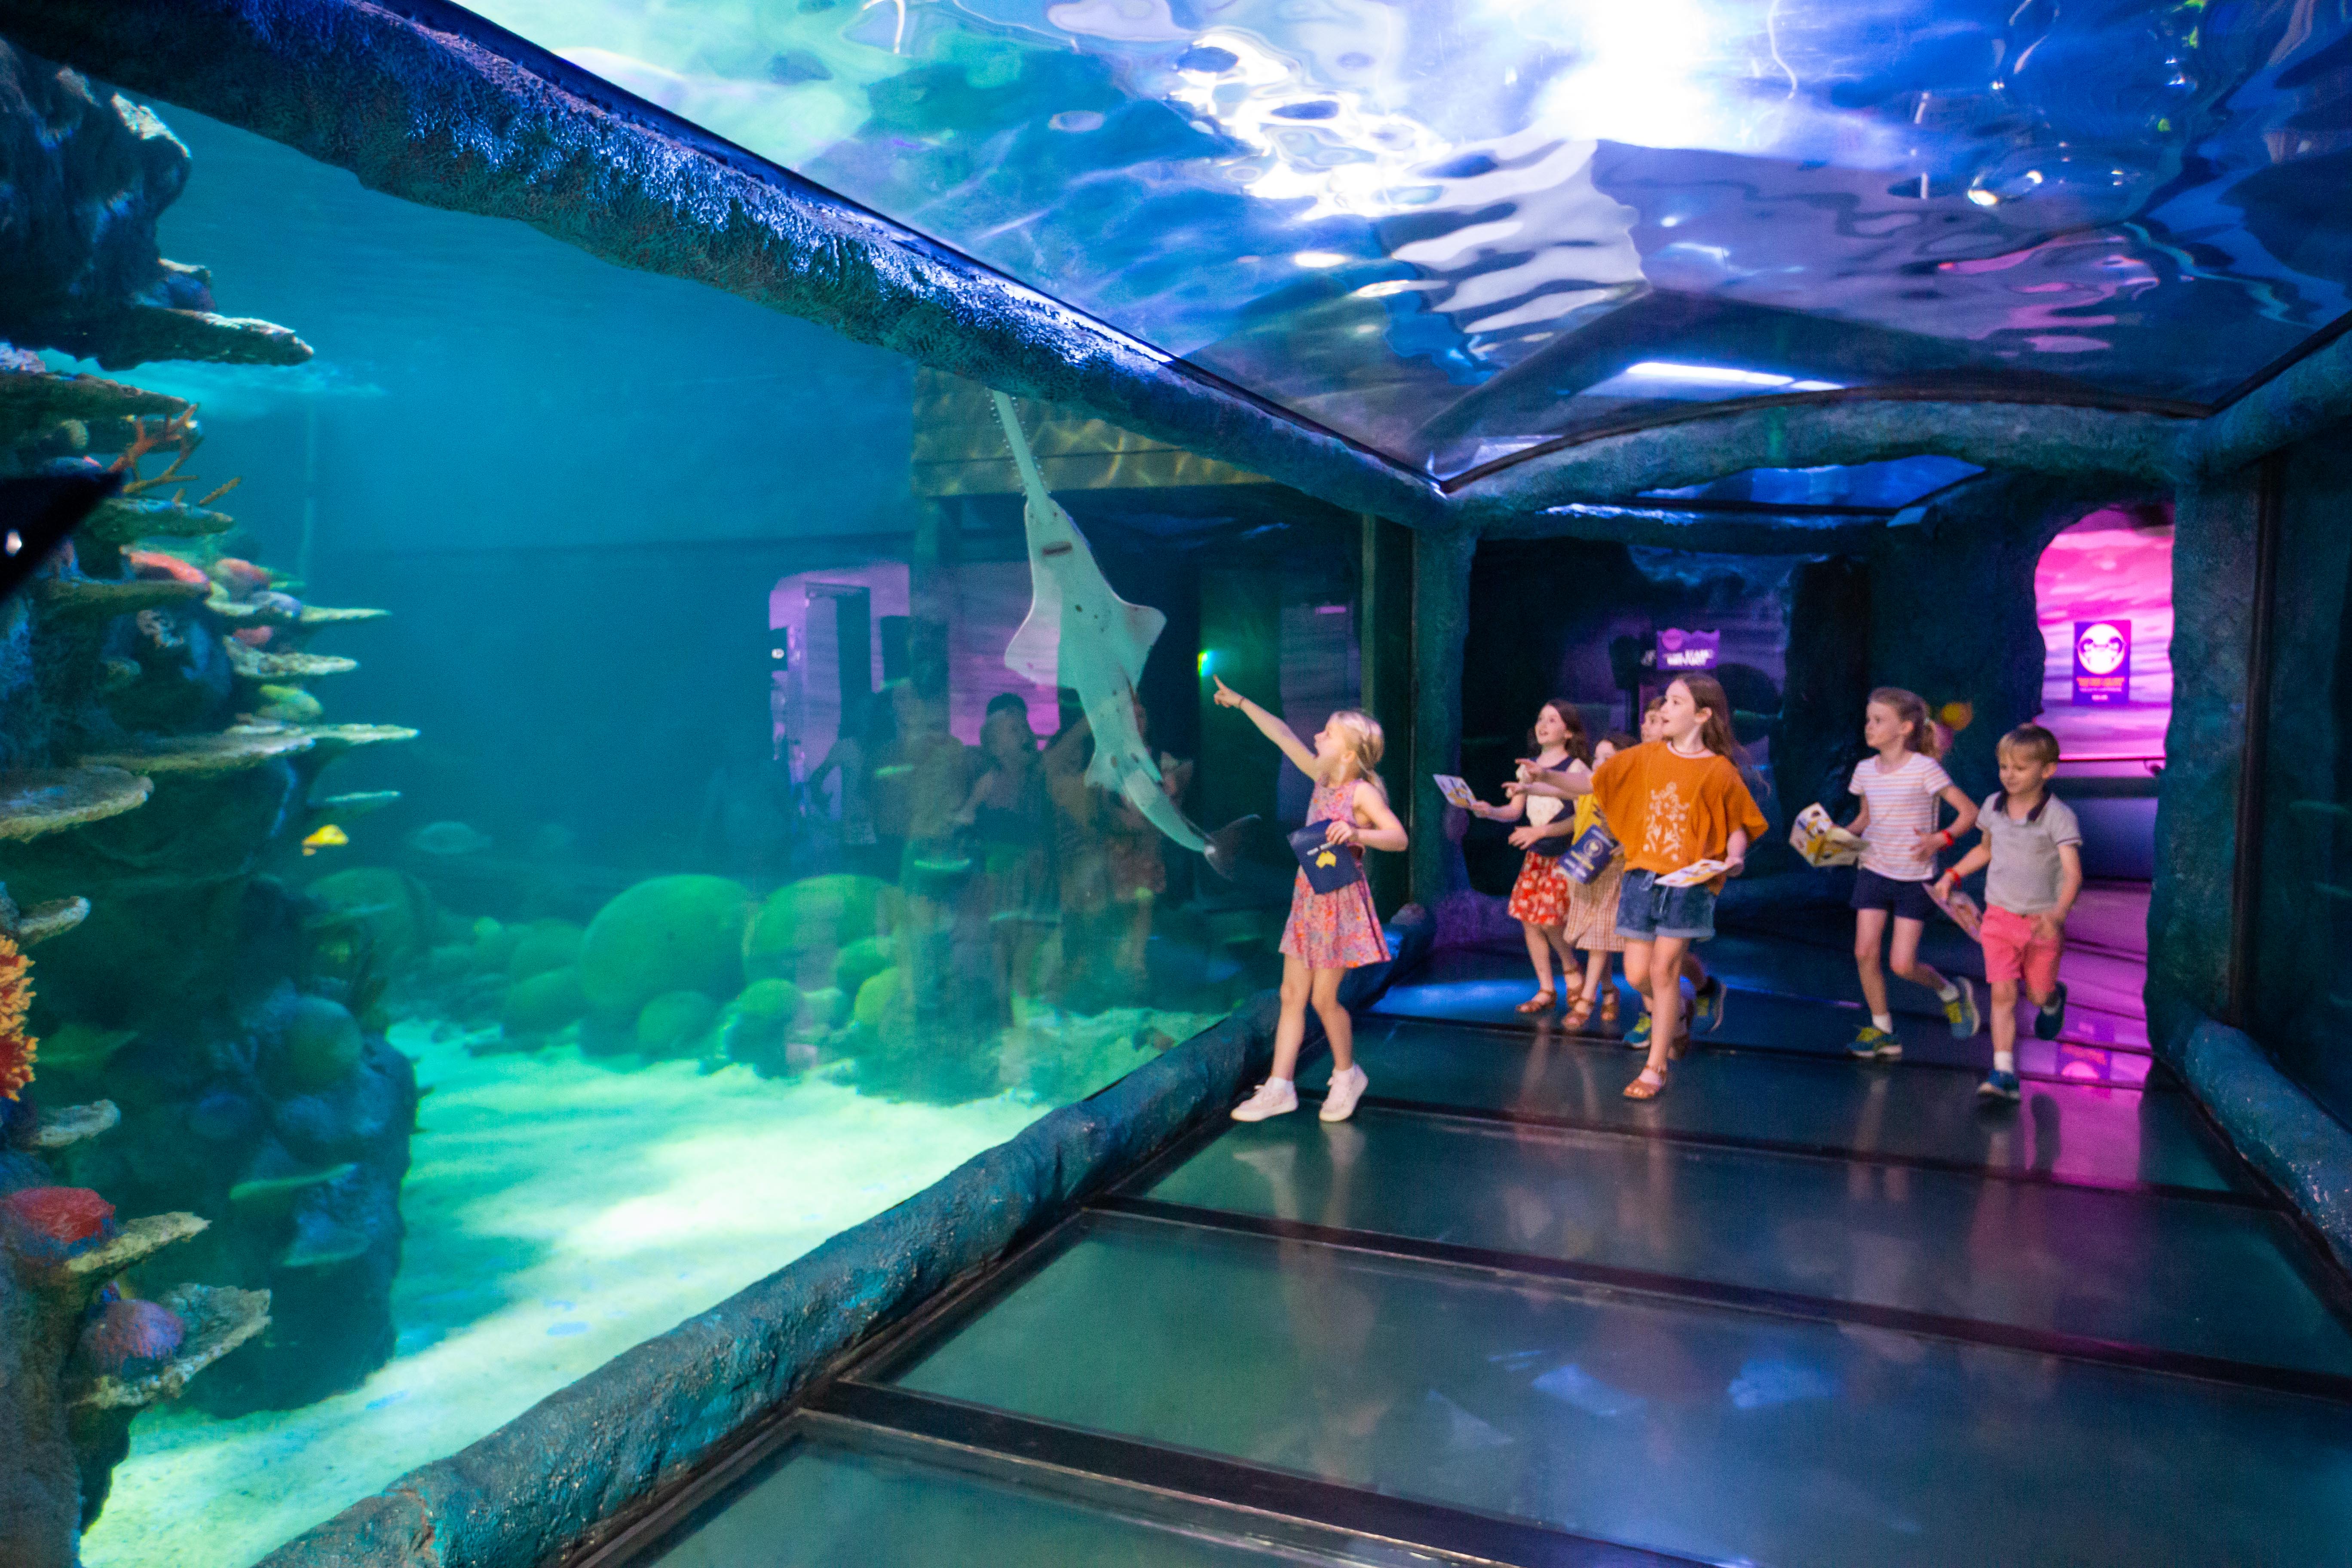 Sawfish Spotted In 360 Glass Tunnel At SEA LIFE Sydney Aquarium